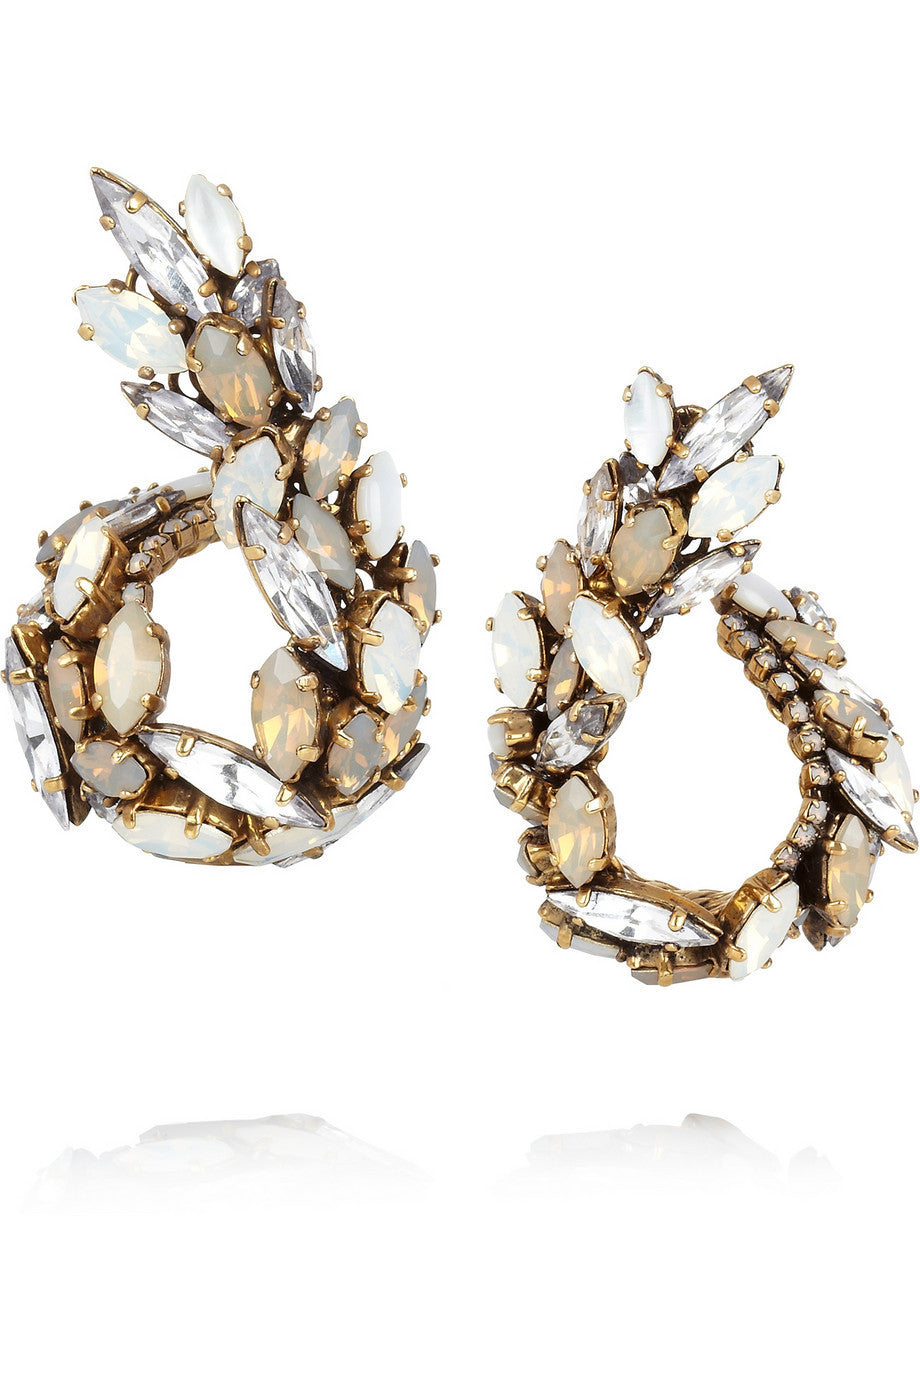 Whiter Shade of Pale gold-plated Swarovski crystal earrings